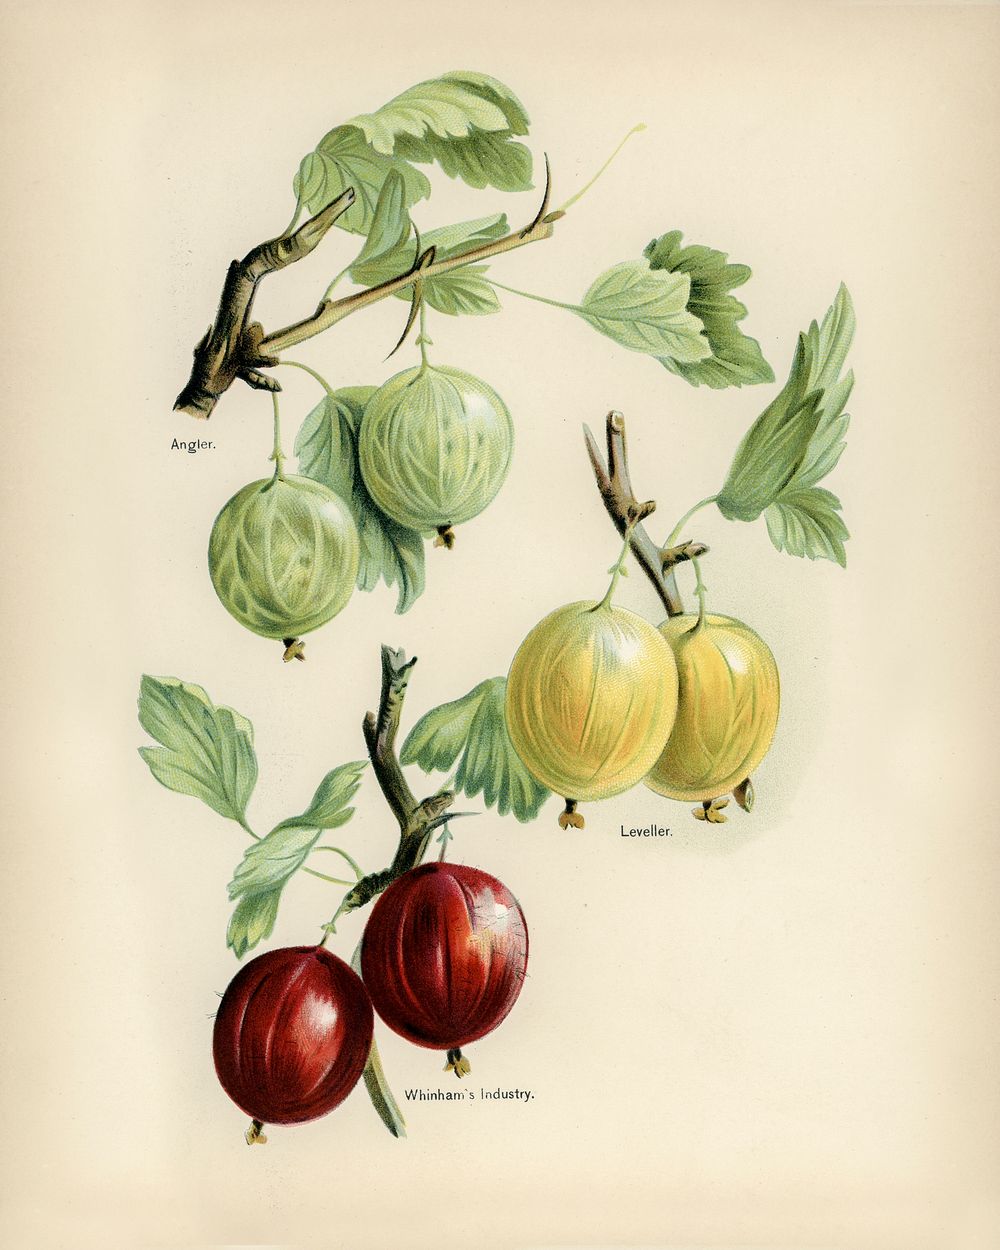 Vintage illustration of early transparent gage digitally enhanced from our own vintage edition of The Fruit Grower's Guide…